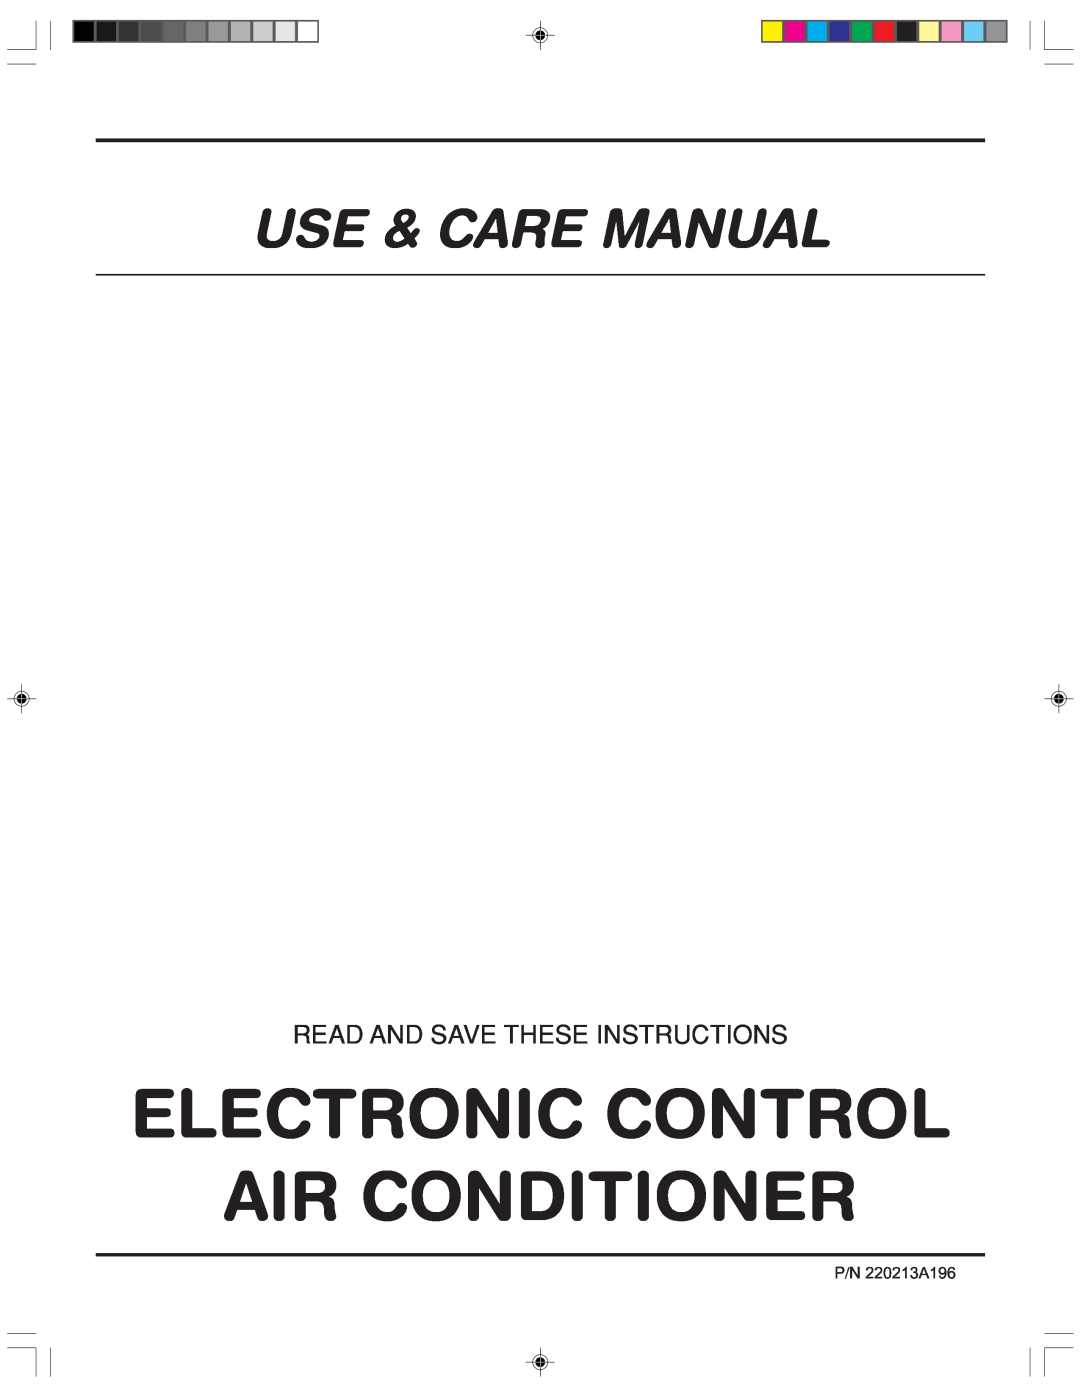 Frigidaire 220213A196 manual Electronic Control Air Conditioner, Use & Care Manual, Read And Save These Instructions 